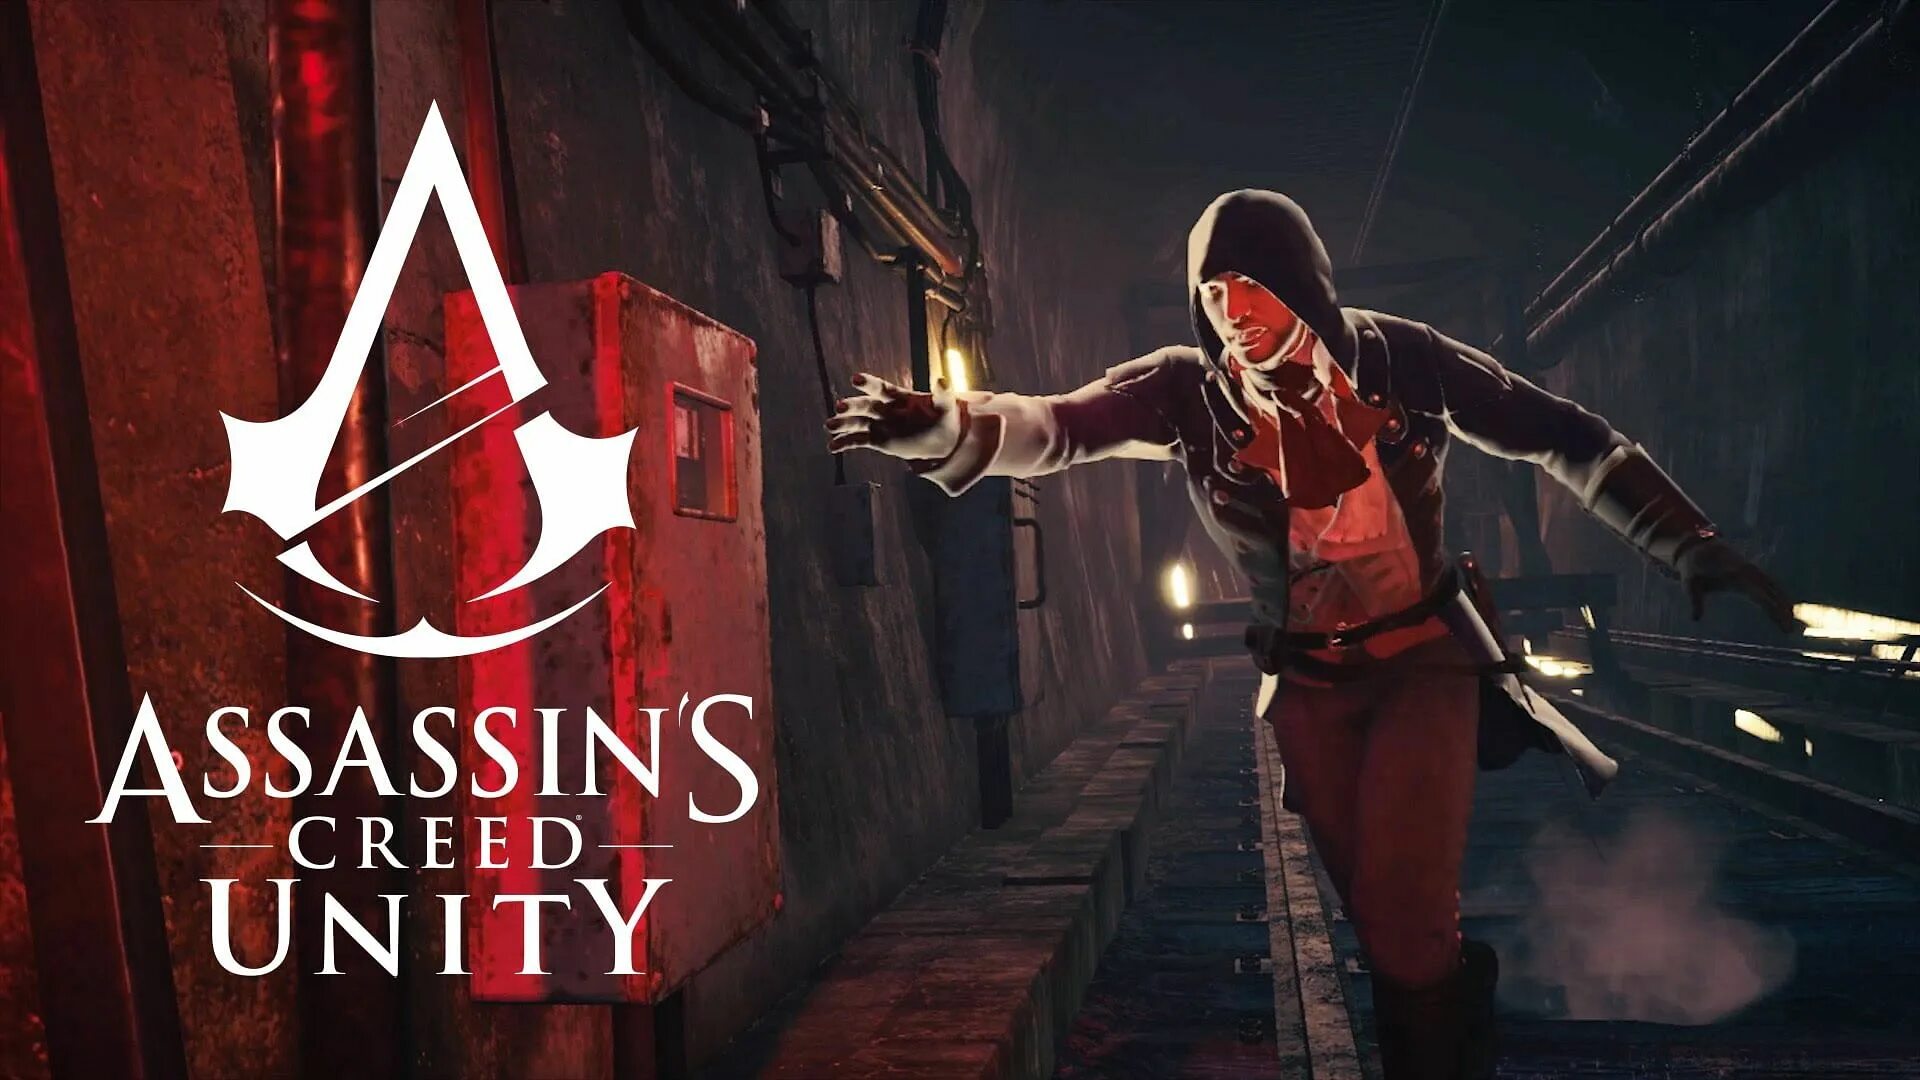 Assassin's Creed Unity Syndicate. Assassin's Creed Unity Trailer. Миссия ассасина / Assassin.